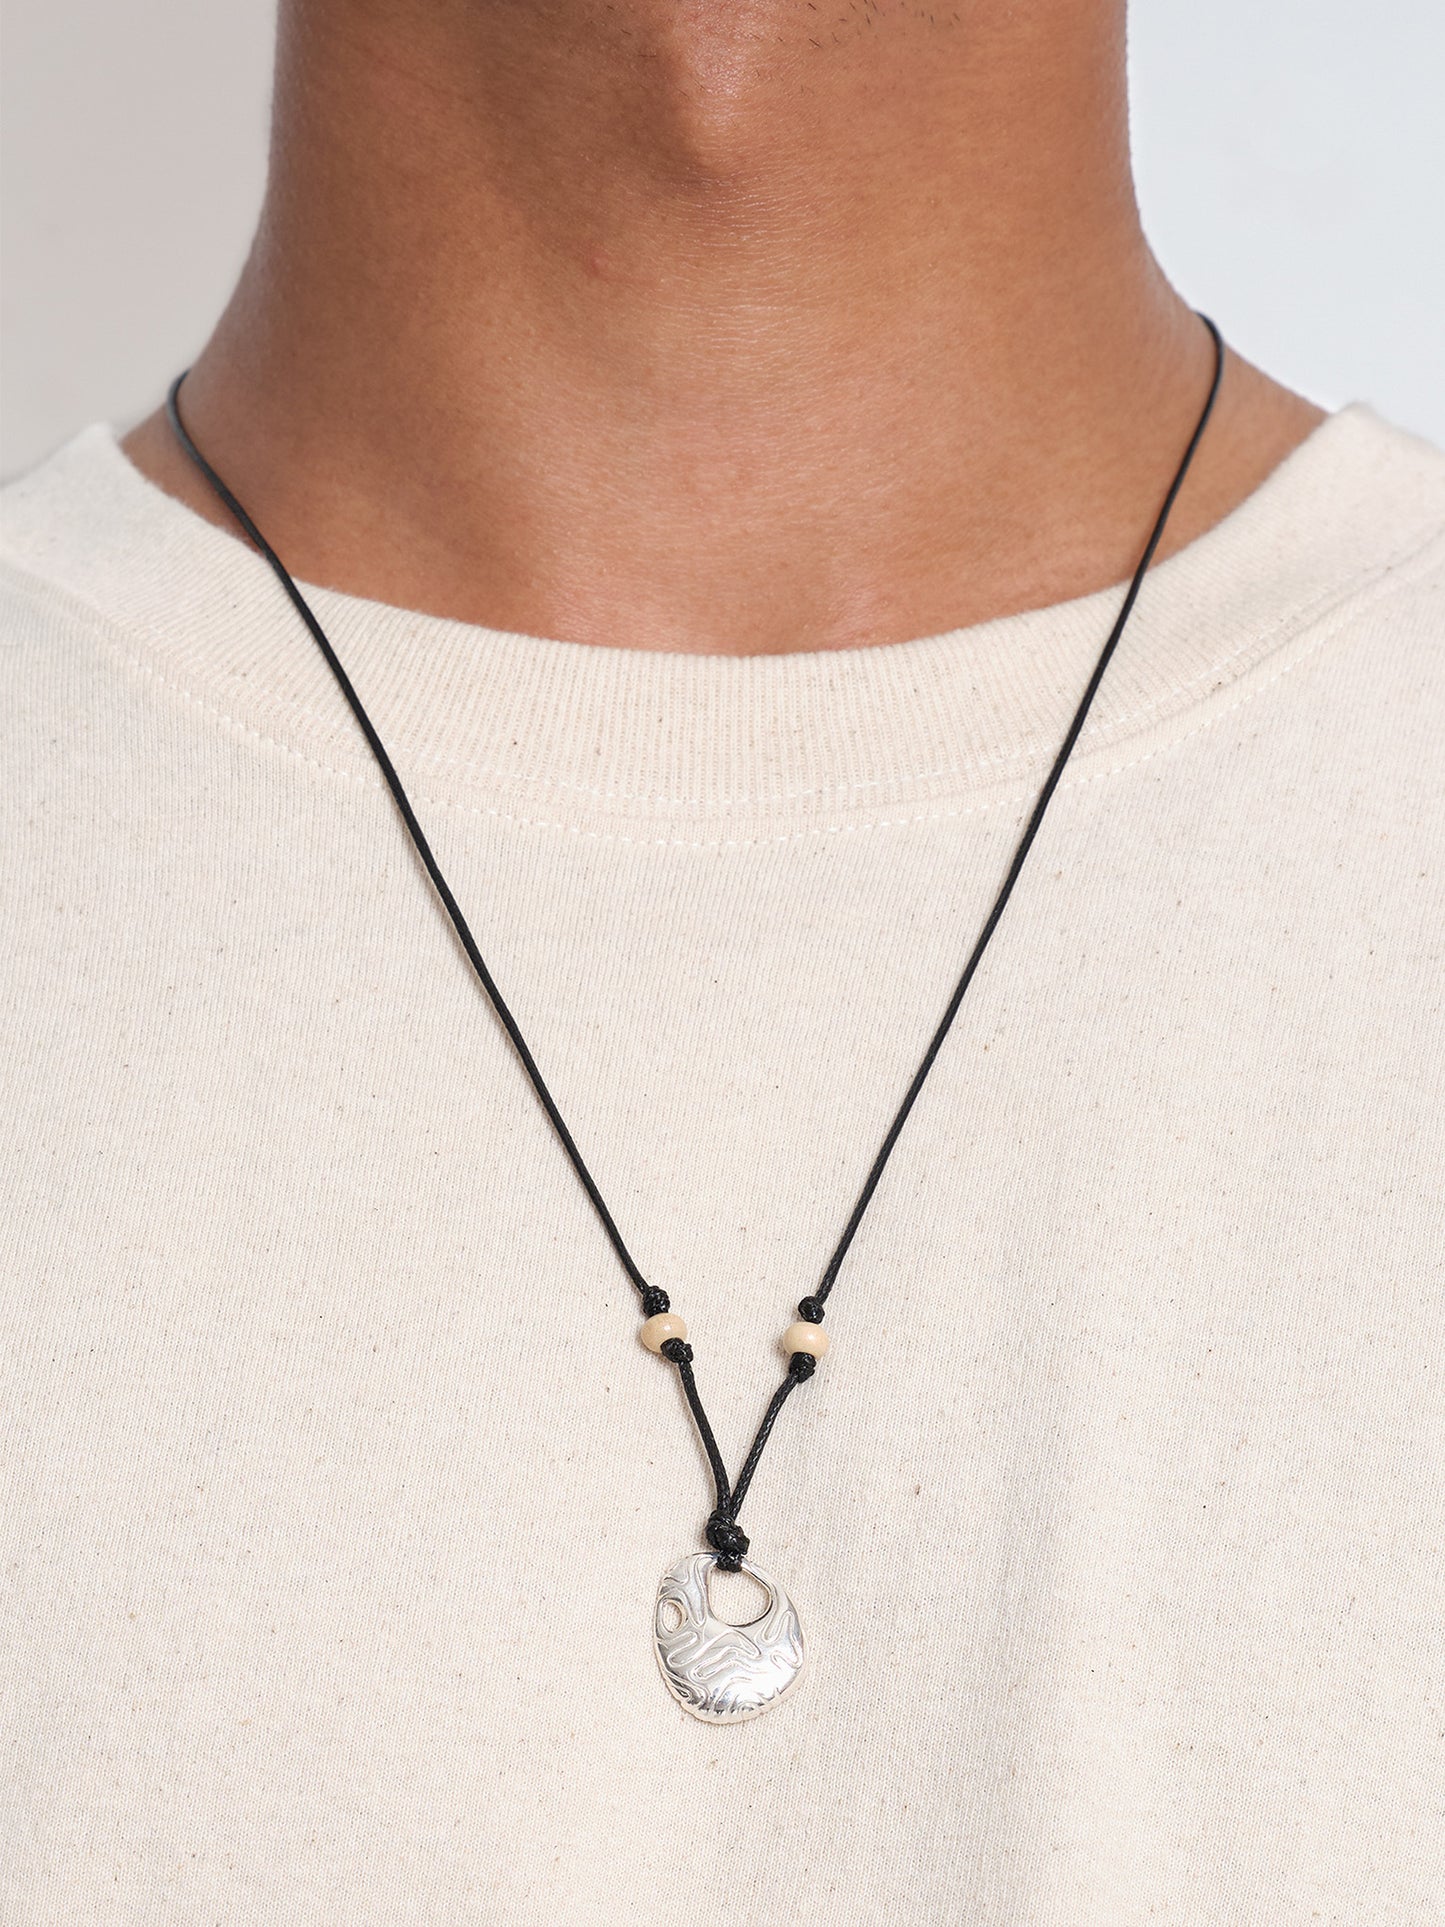 Story mfg. x octi Necklace (1)